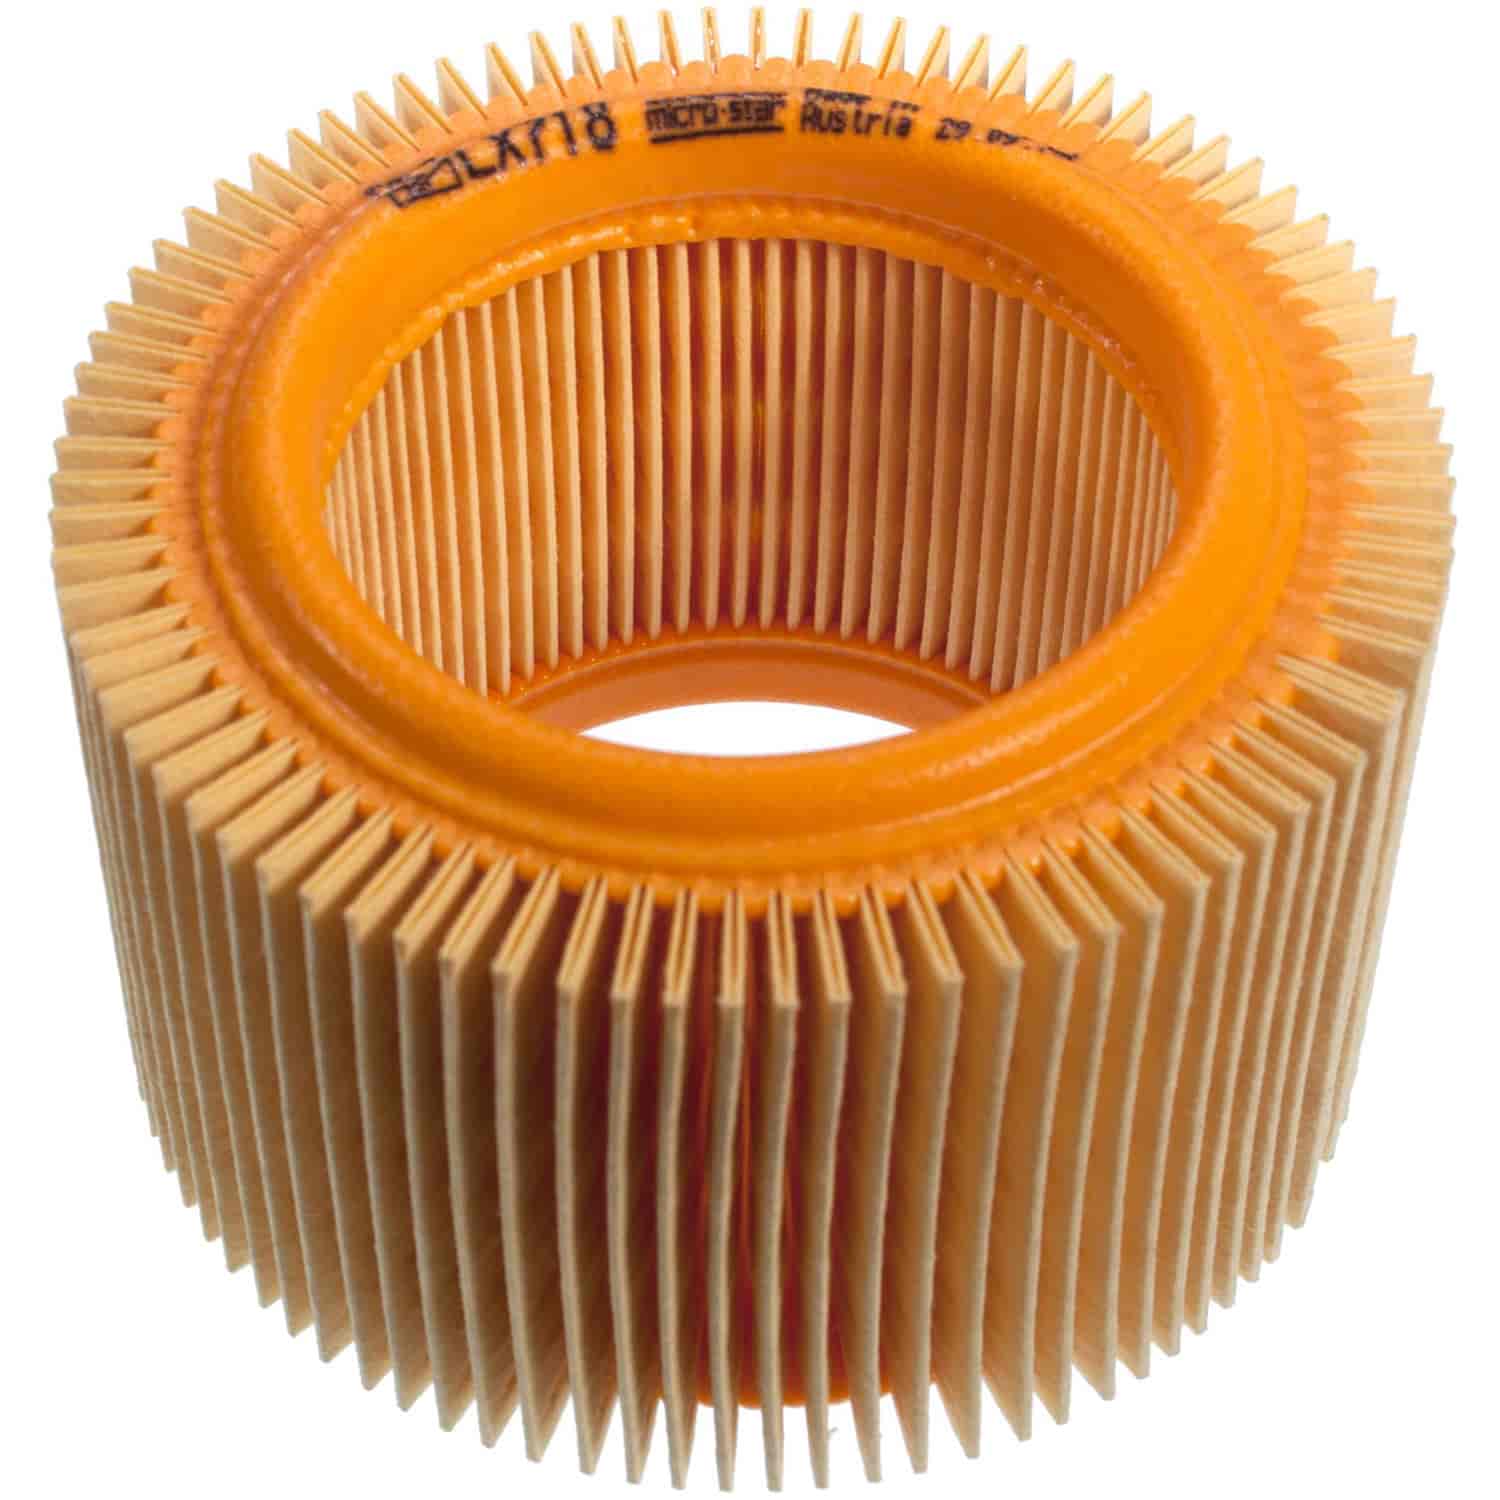 Mahle Air Filter 1997-2005 BMW Motorcycle R-Series 1170/1172cc